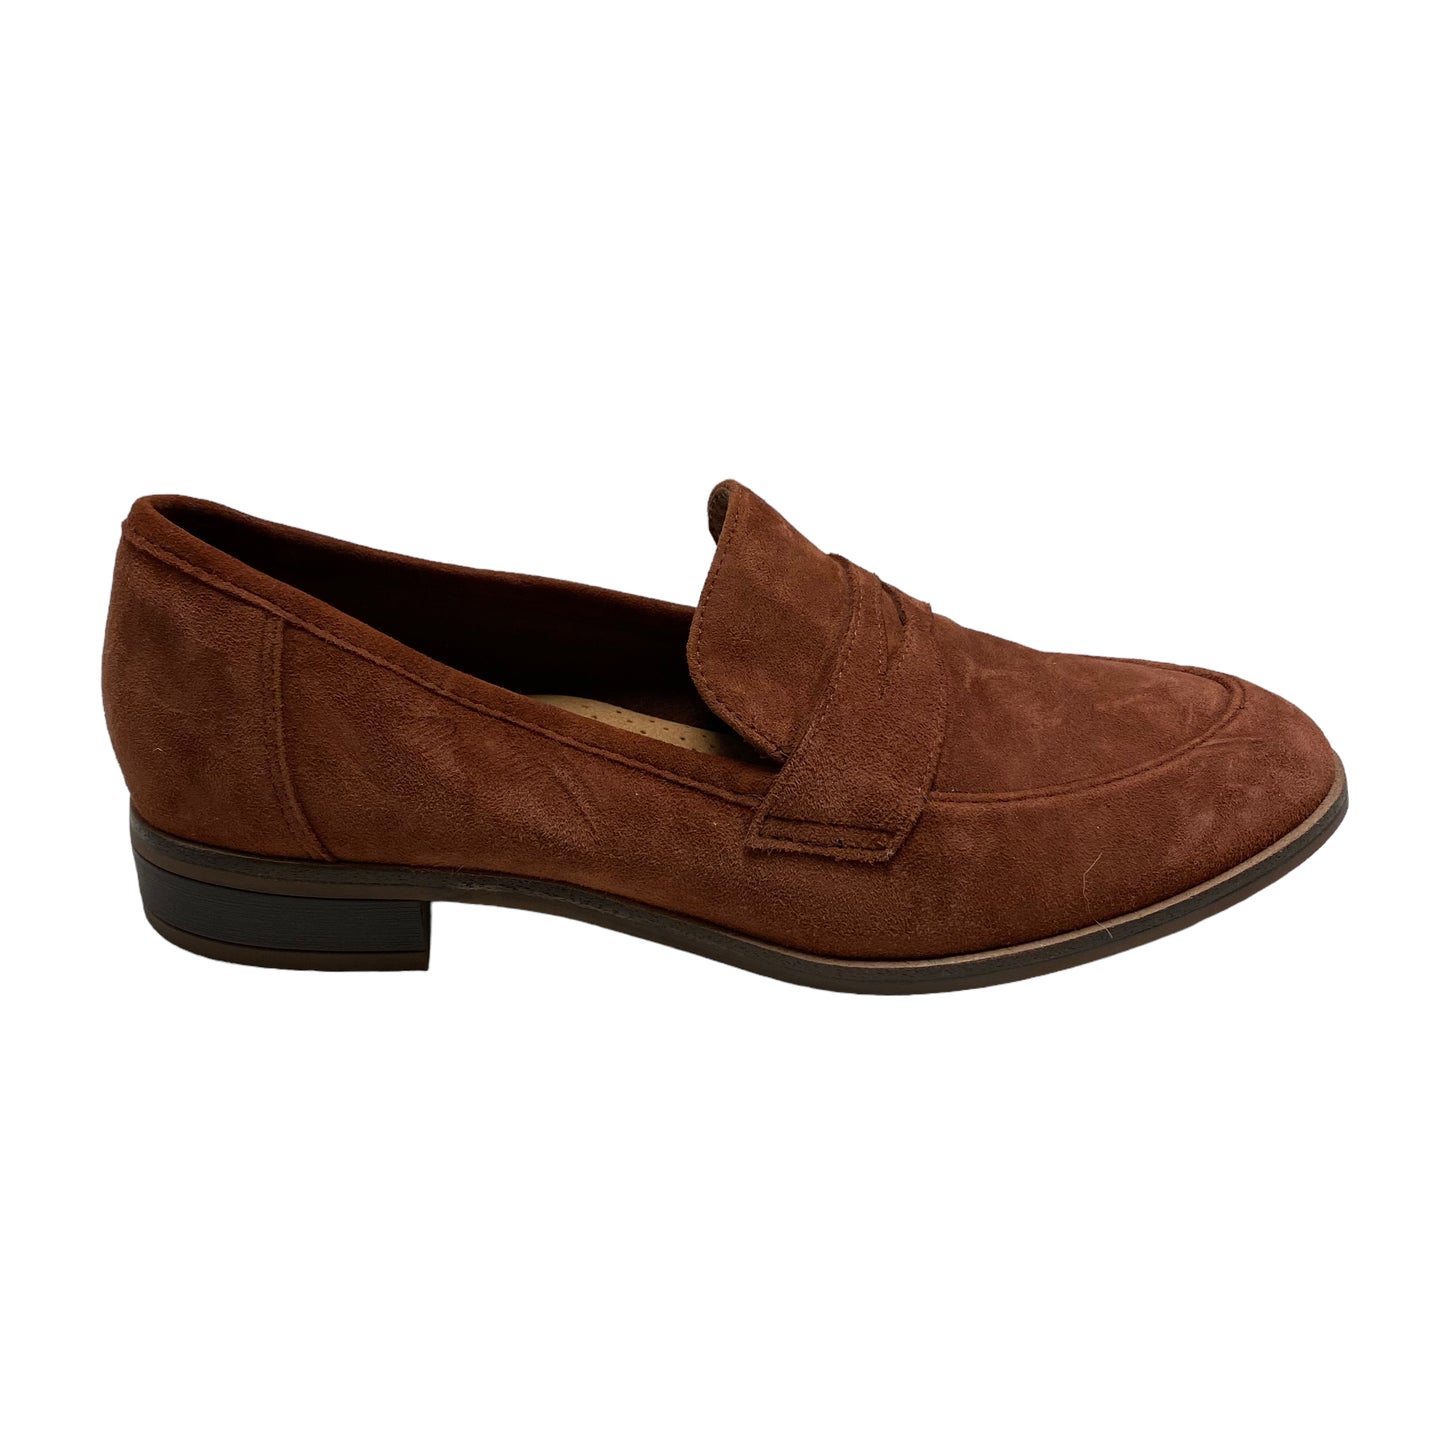 Shoes Flats Loafer Oxford By Clarks  Size: 8